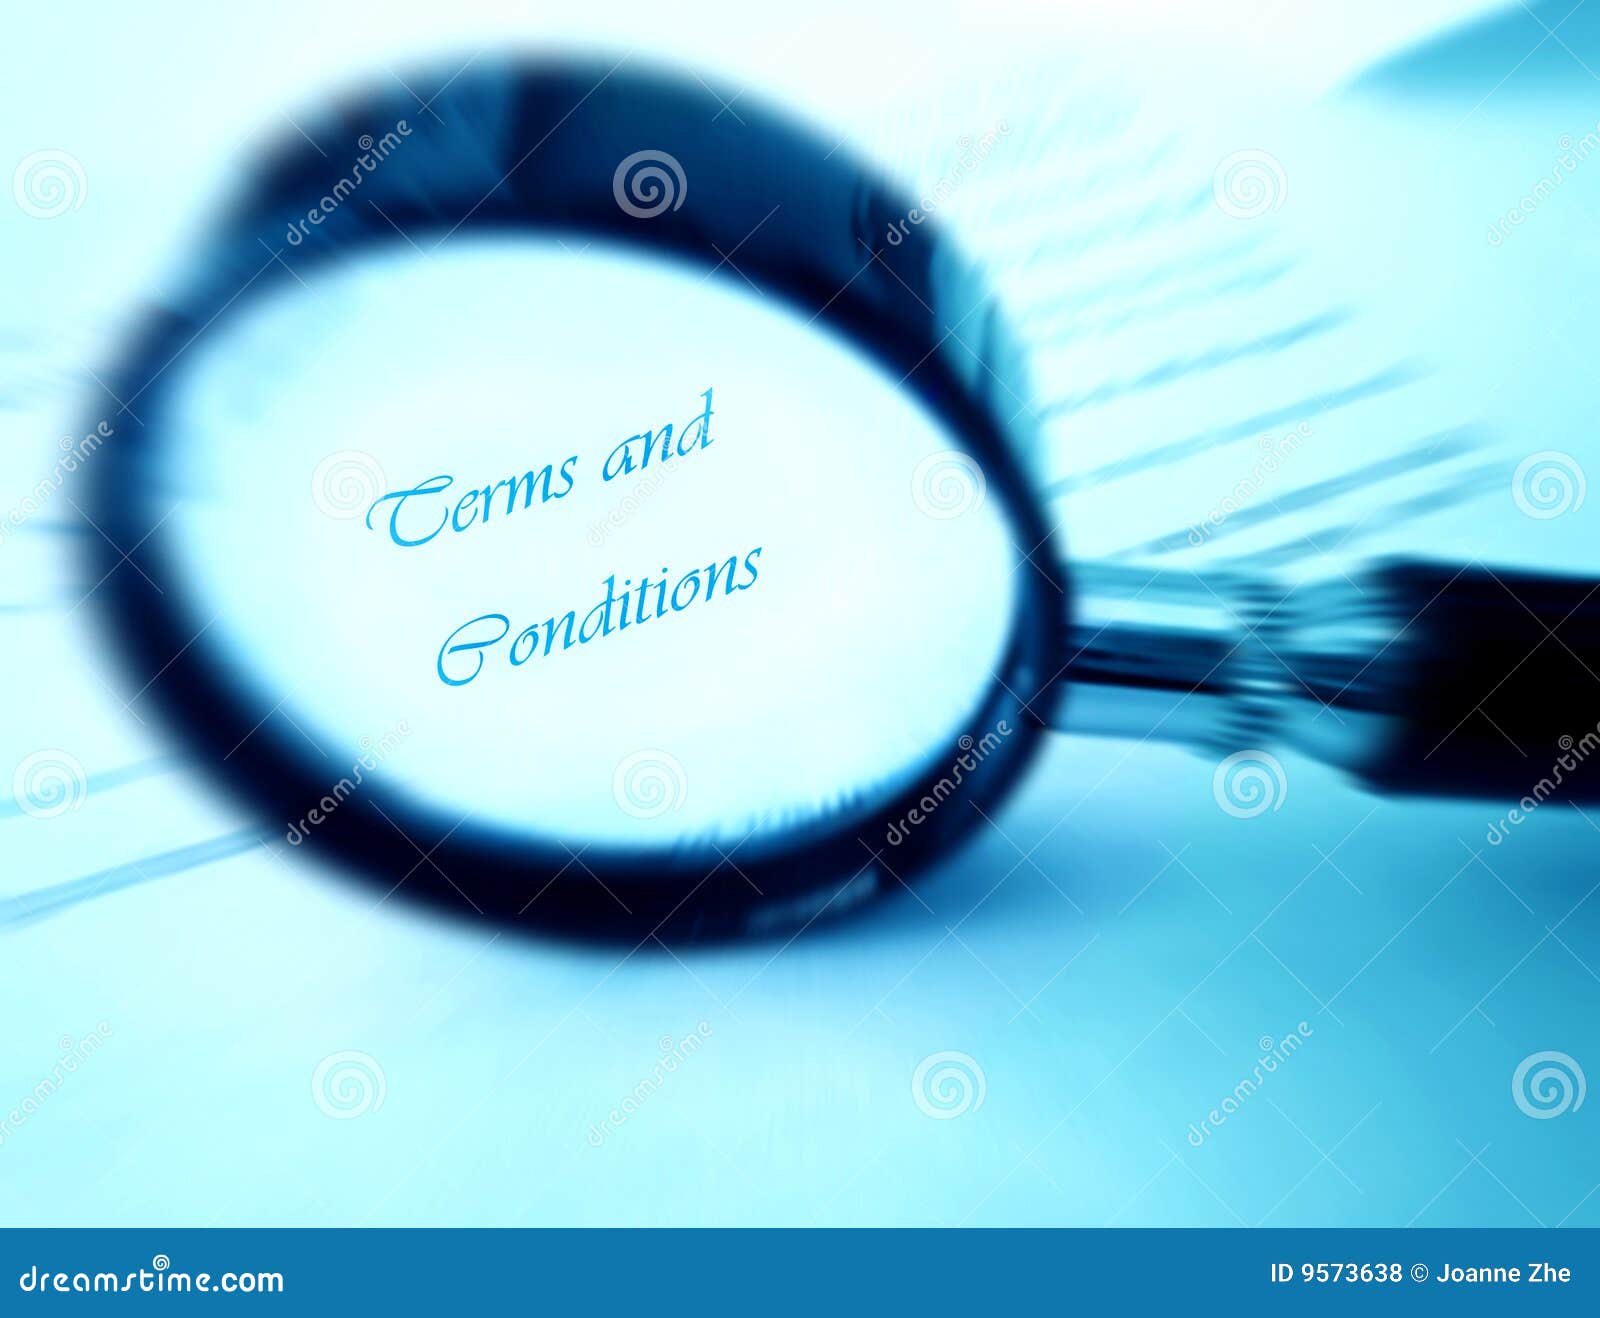 terms and conditions under magnifier